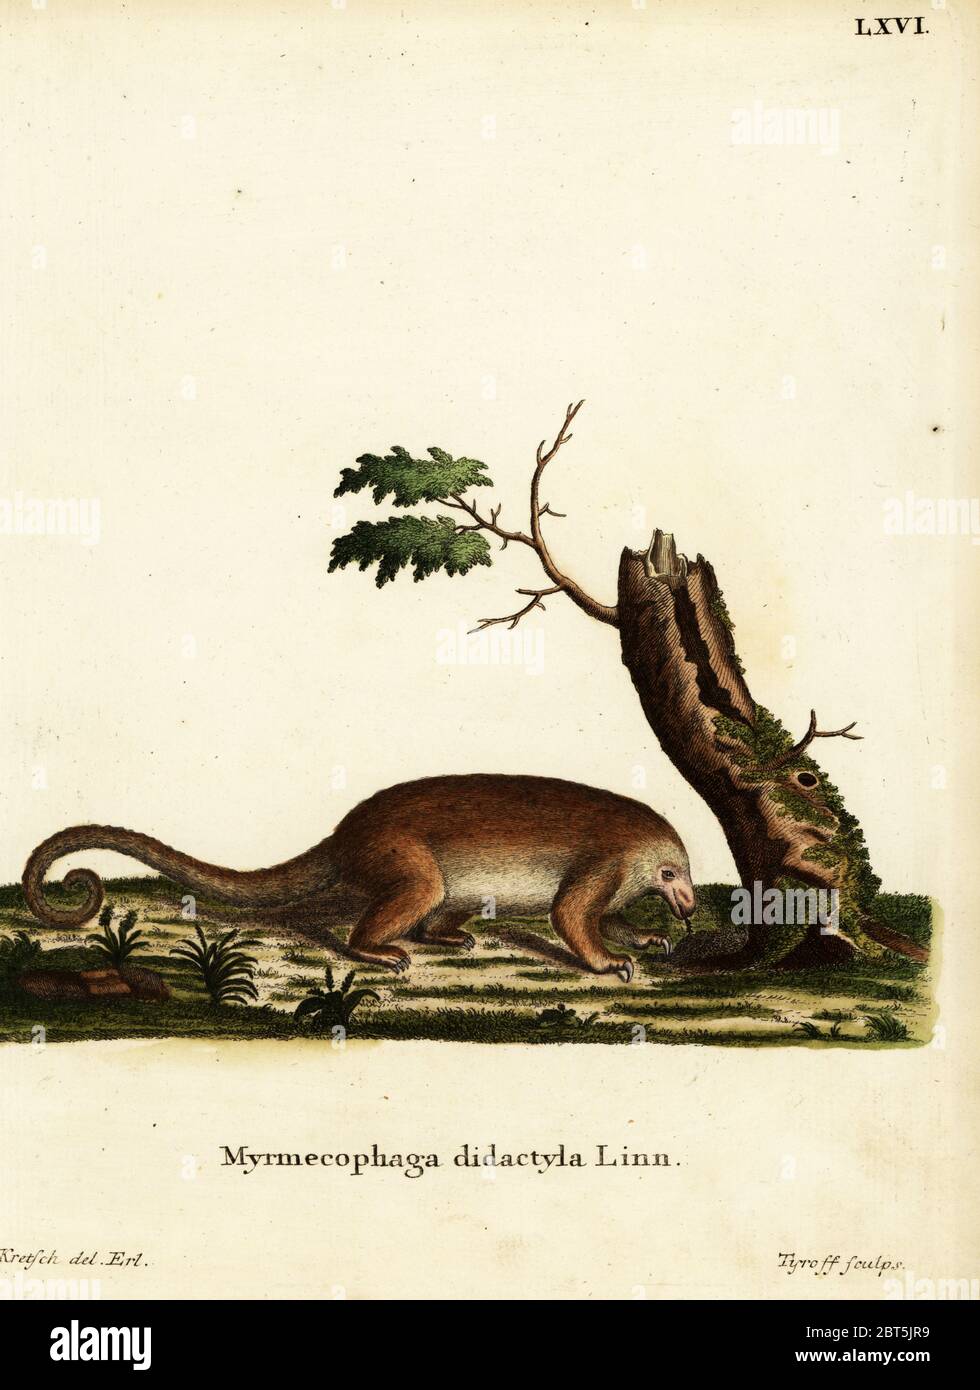 Silky anteater or pygmy anteater, Cyclopes didactylus. Myrmecophaga didactyla Linn. Handcoloured copperplate engraving by Tyroff after an illustration by J.D. Kretsch from Johann Christian Daniel Schreber's Animal Illustrations after Nature, or Schreber's Fantastic Animals, Erlangen, Germany, 1775. Stock Photo